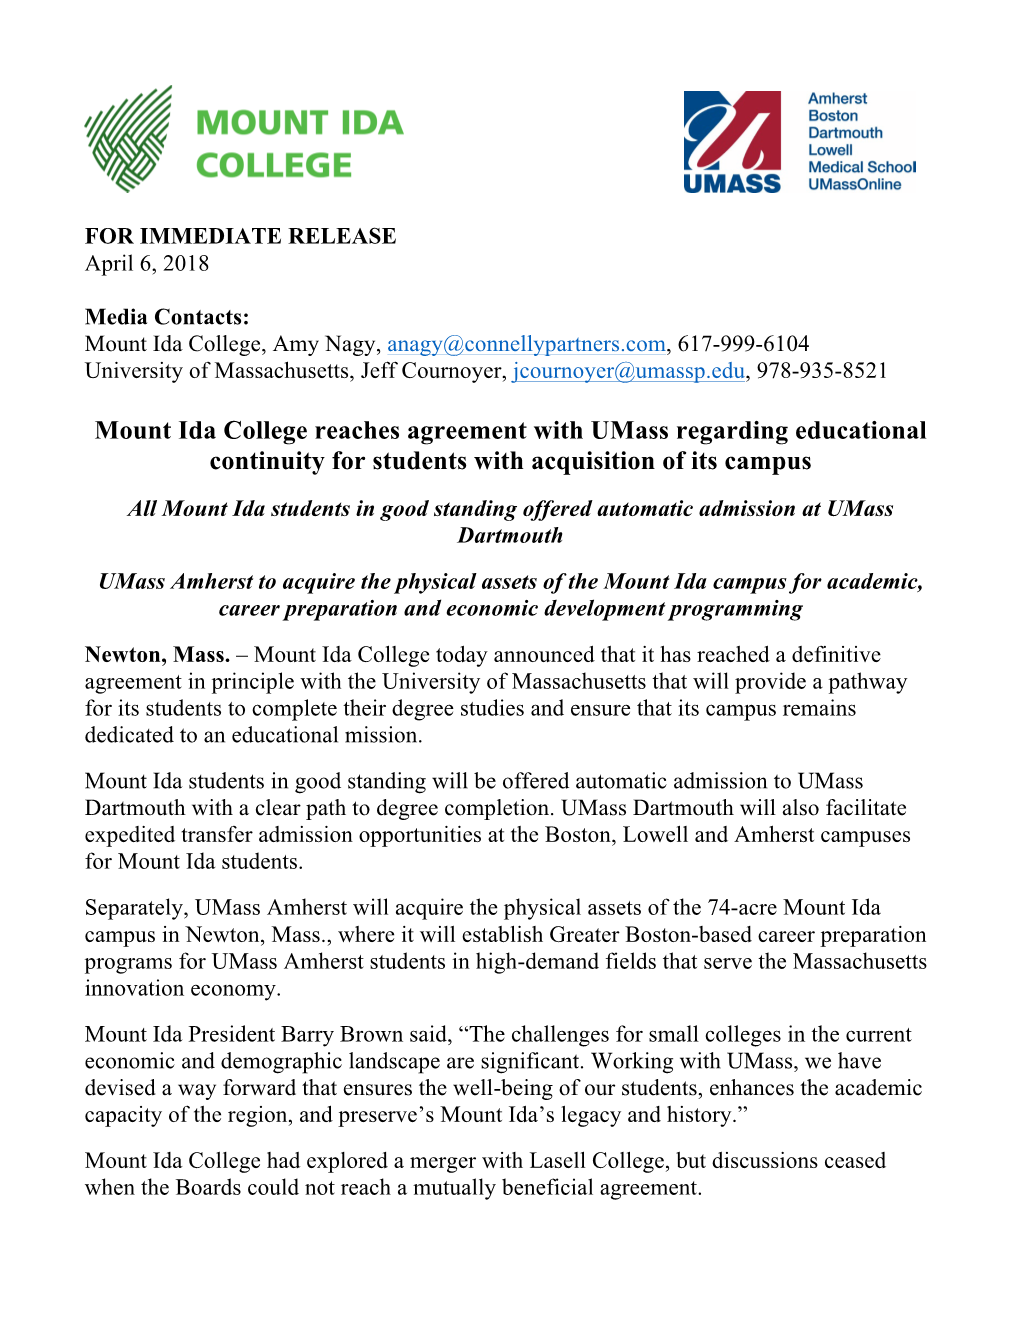 Mount Ida College Reaches Agreement with Umass Regarding Educational Continuity for Students with Acquisition of Its Campus